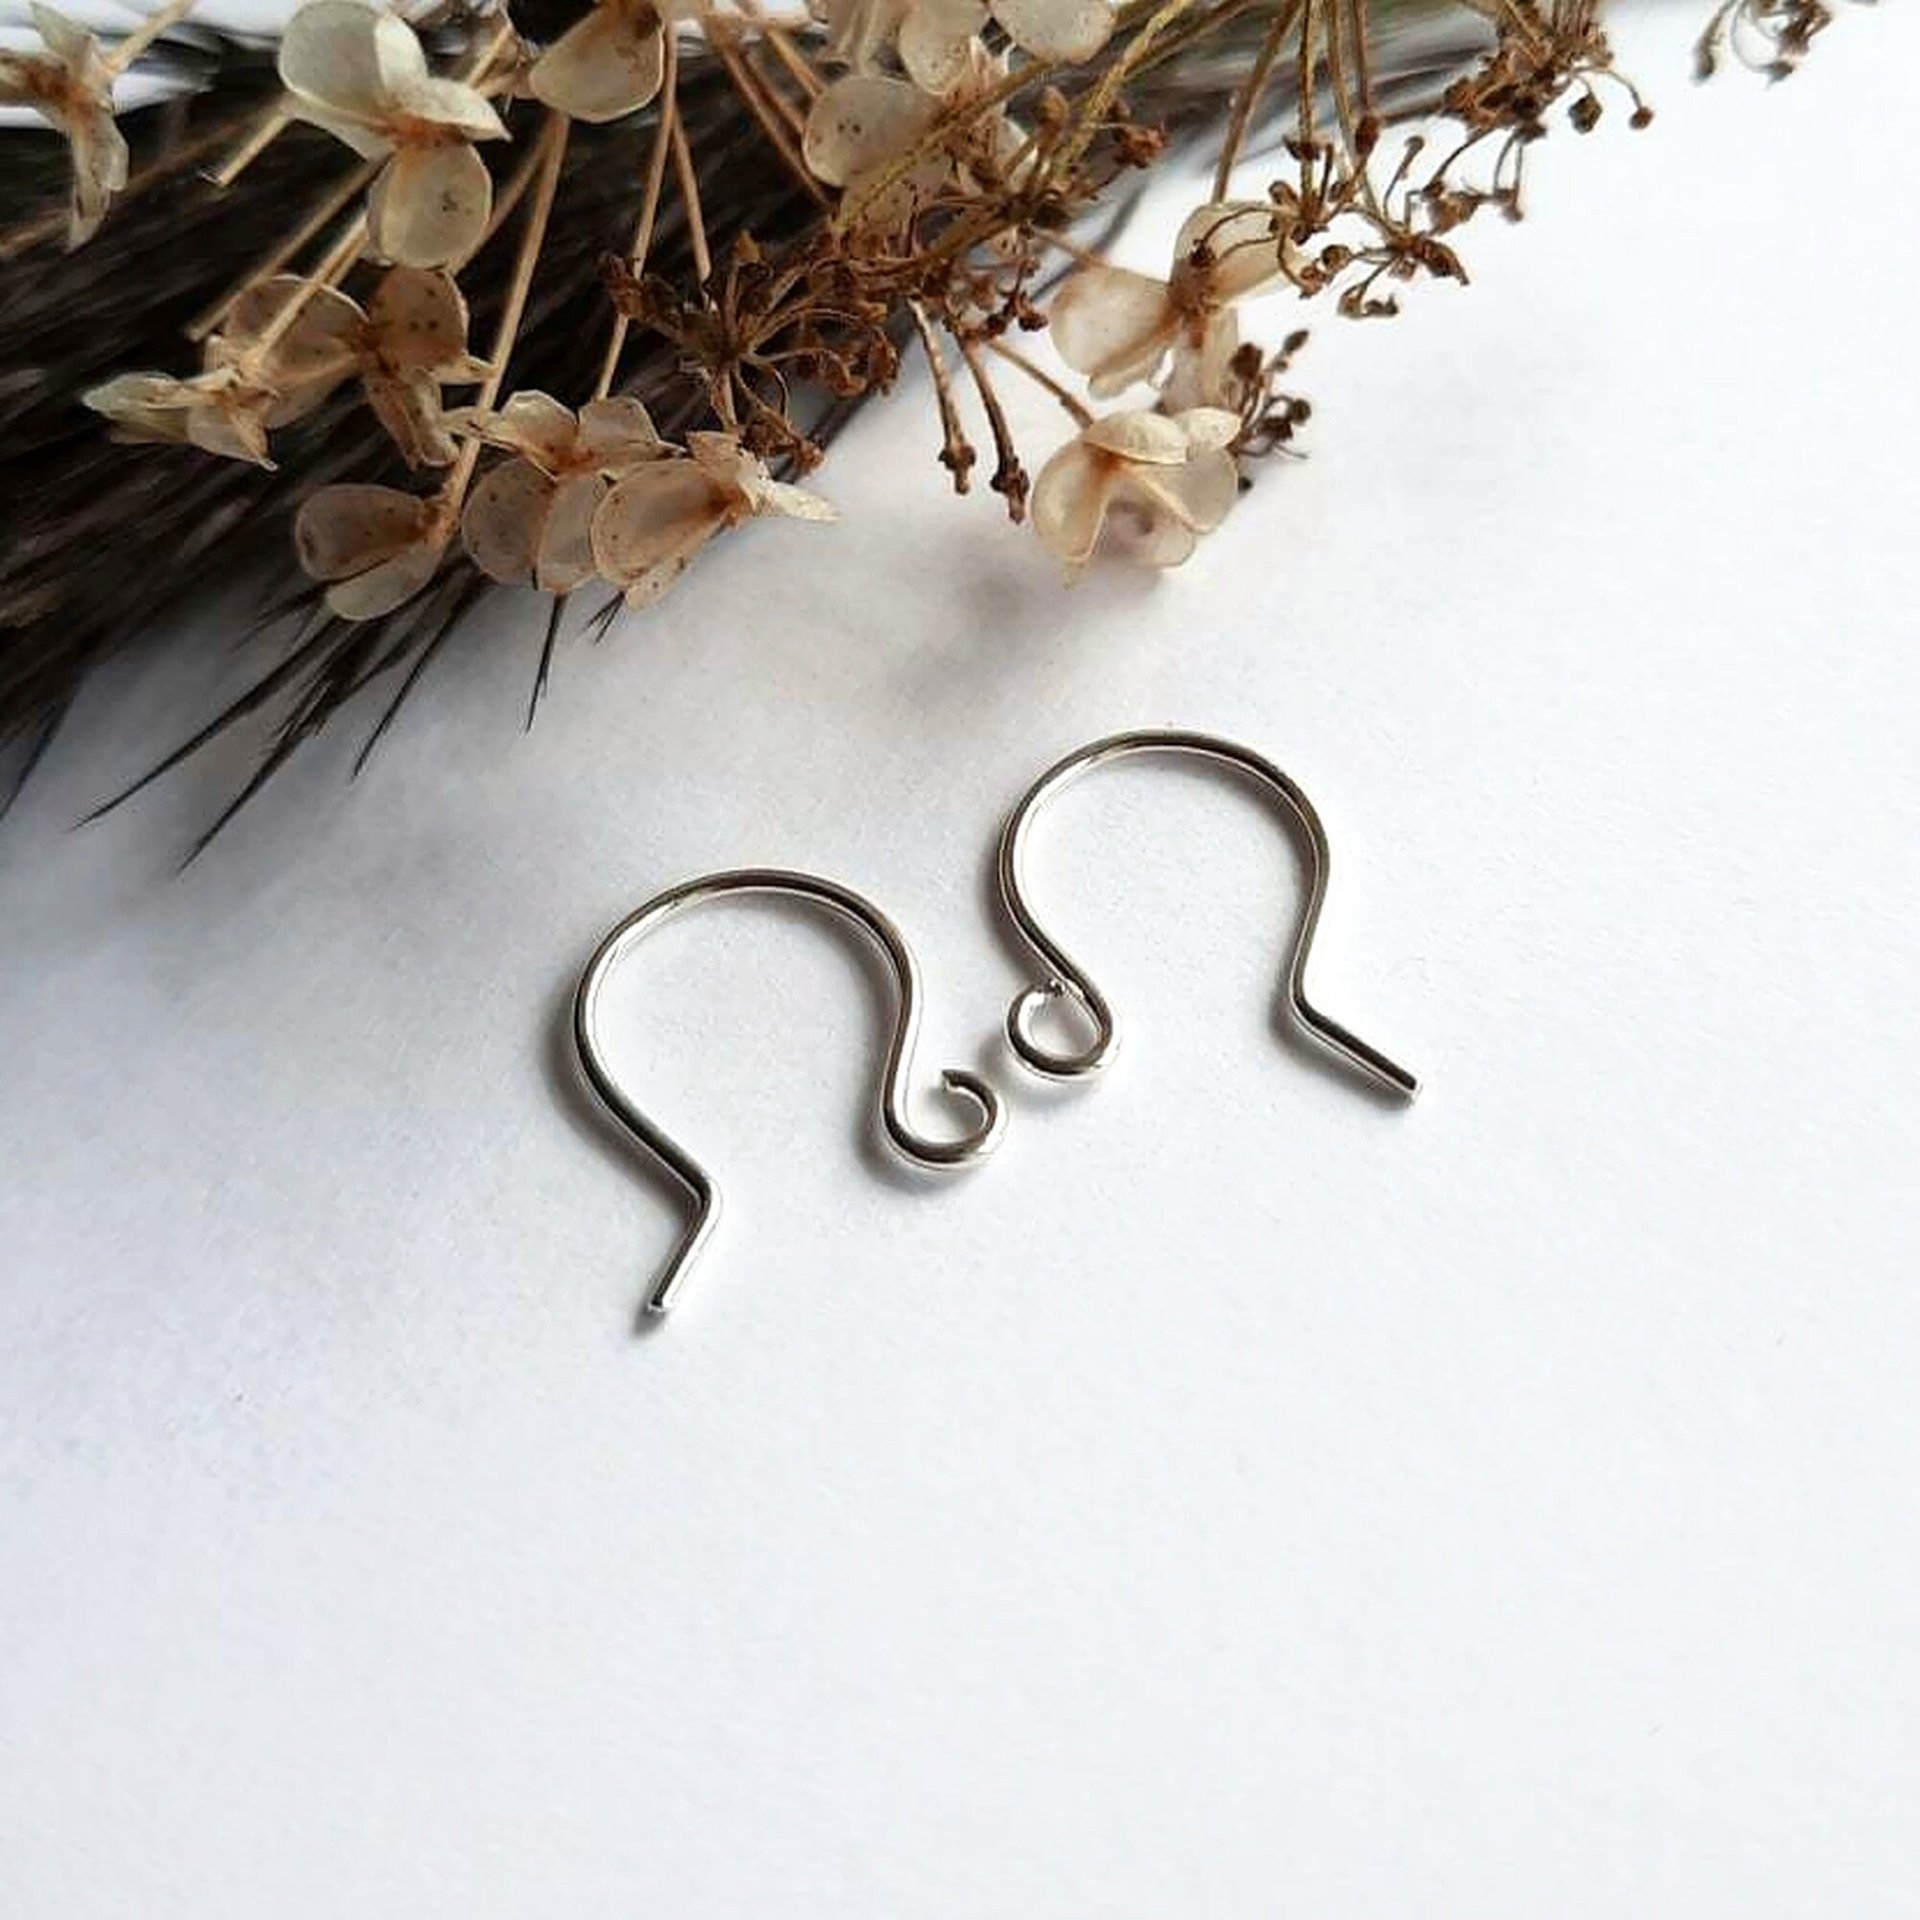 Mini 925 Sterling Silver Fish Hook Ear Wires ~ Handmade by The Tiny Tree Frog Jewellery